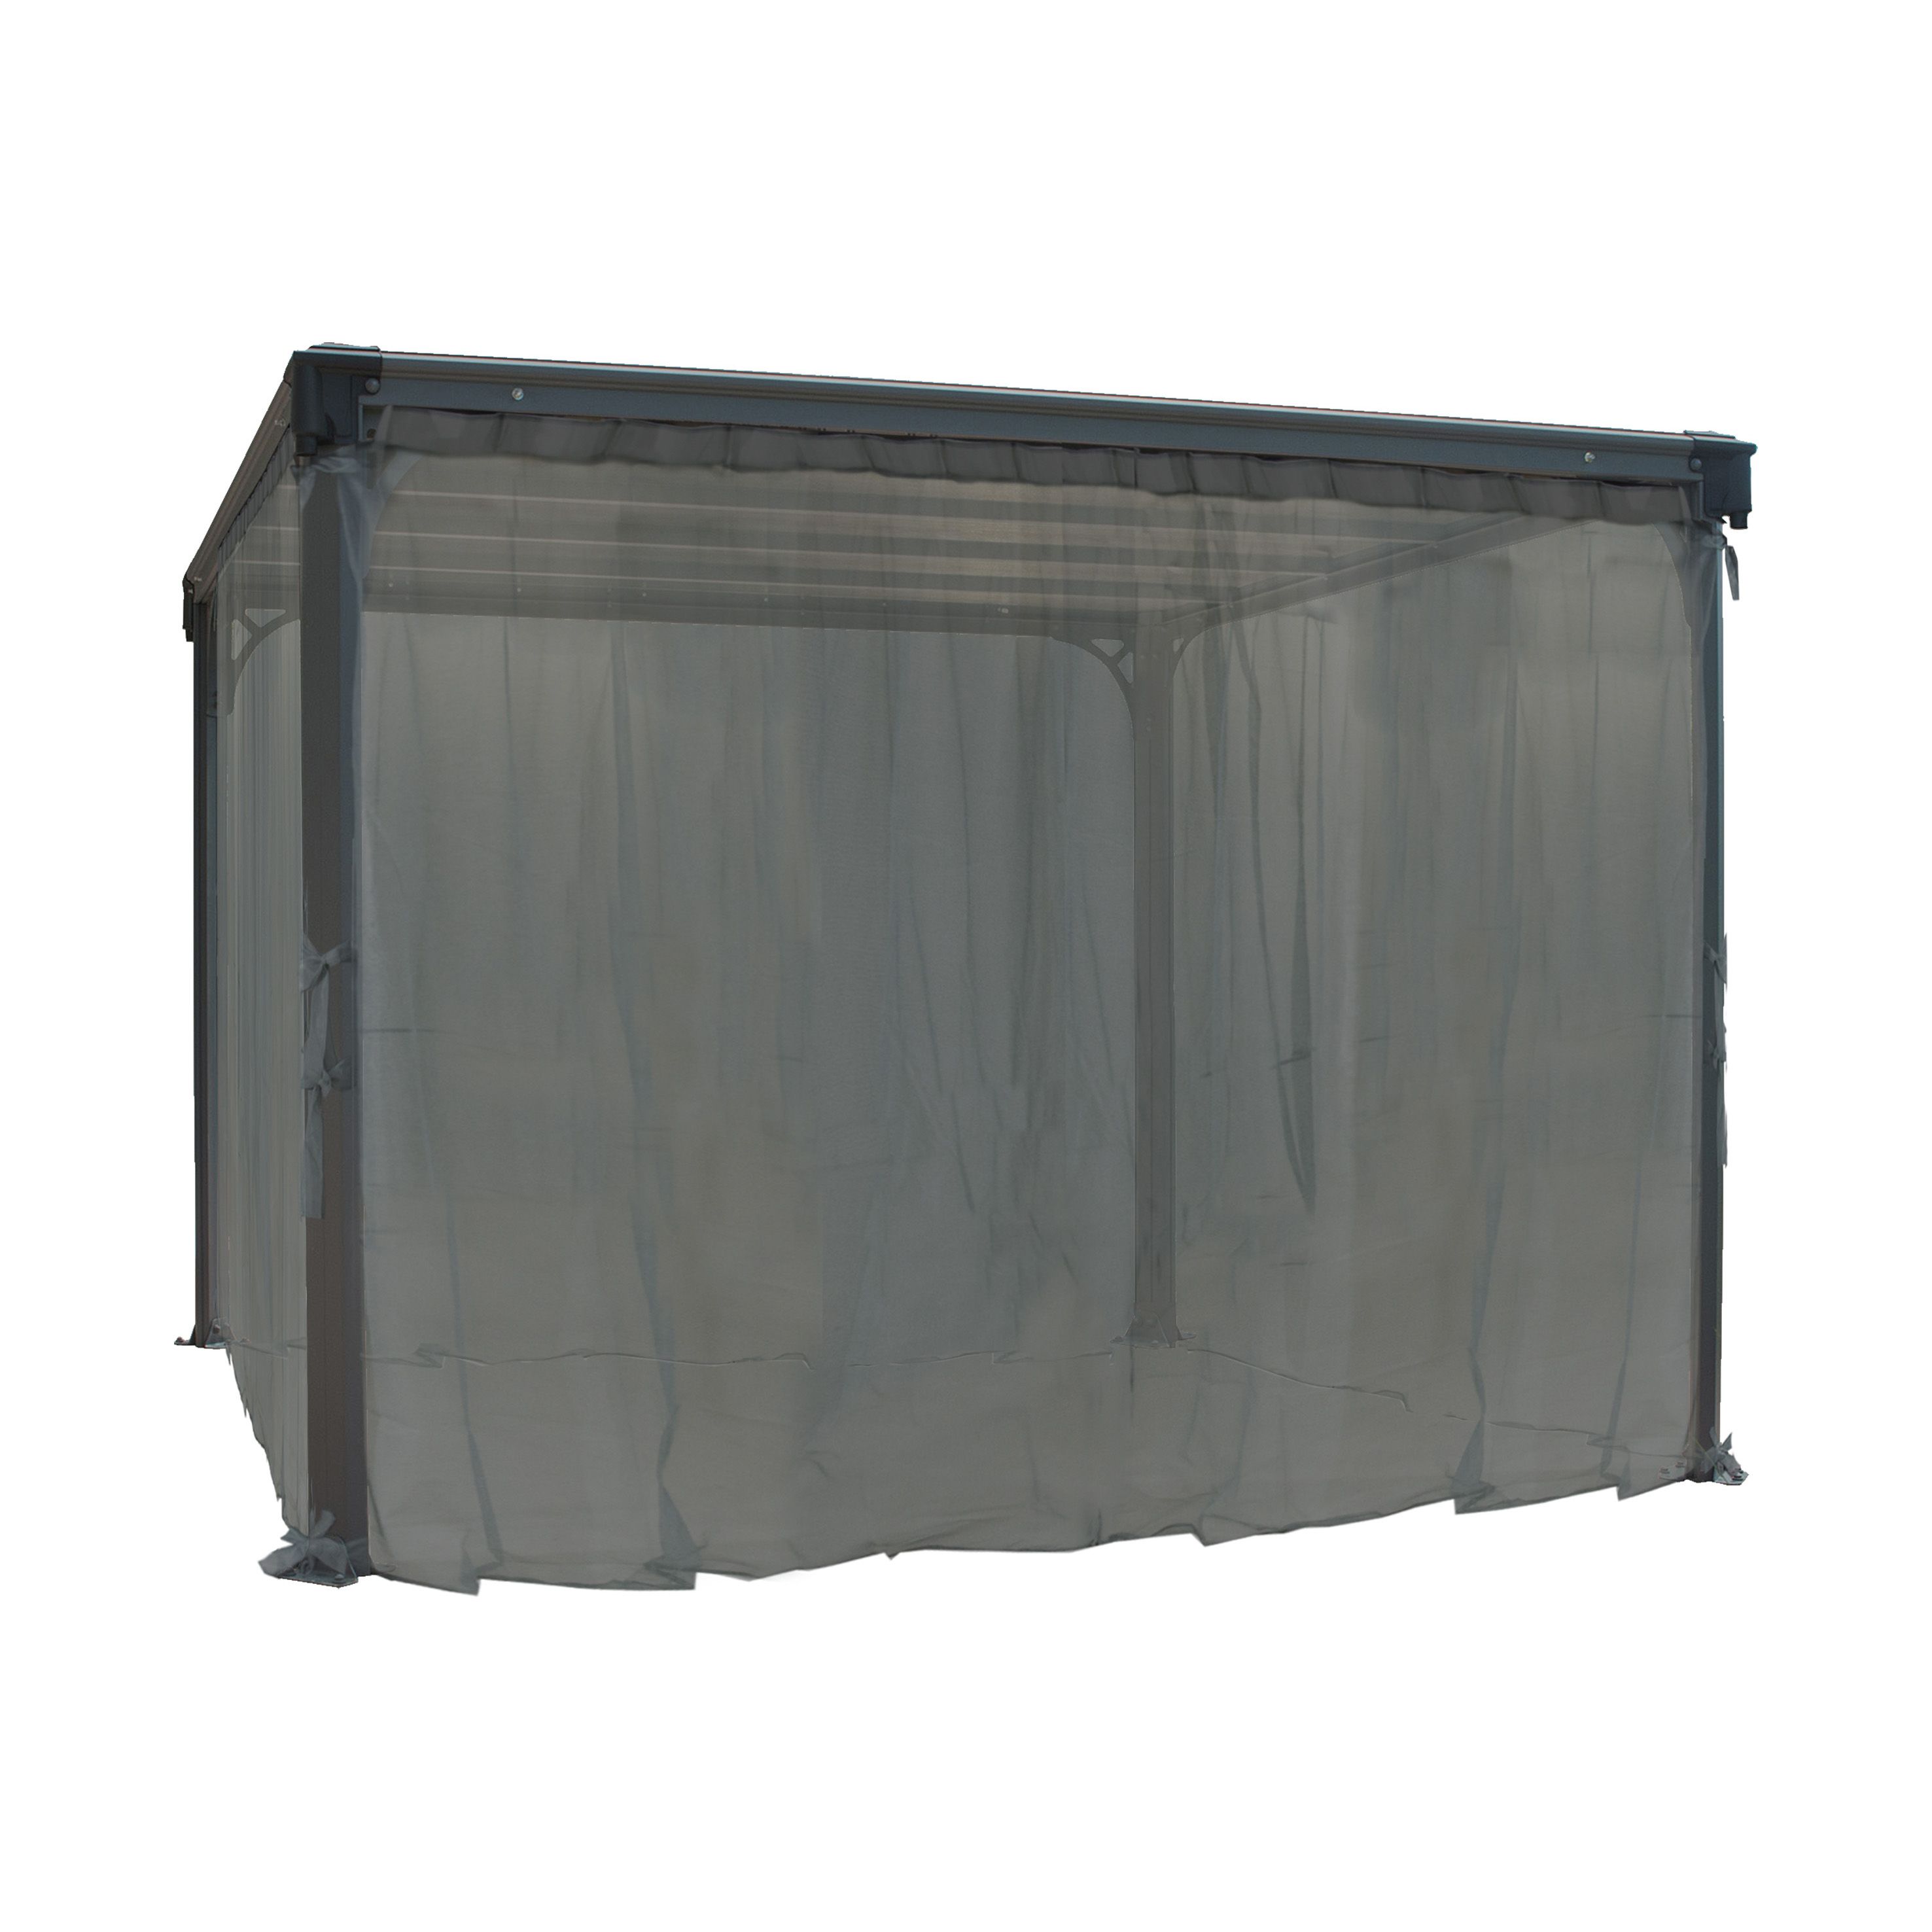 Palram - Canopia 3K Series Grey Polyester (PES) Gazebo netting, Pack of 6 (L)2170mm (W)3660mm